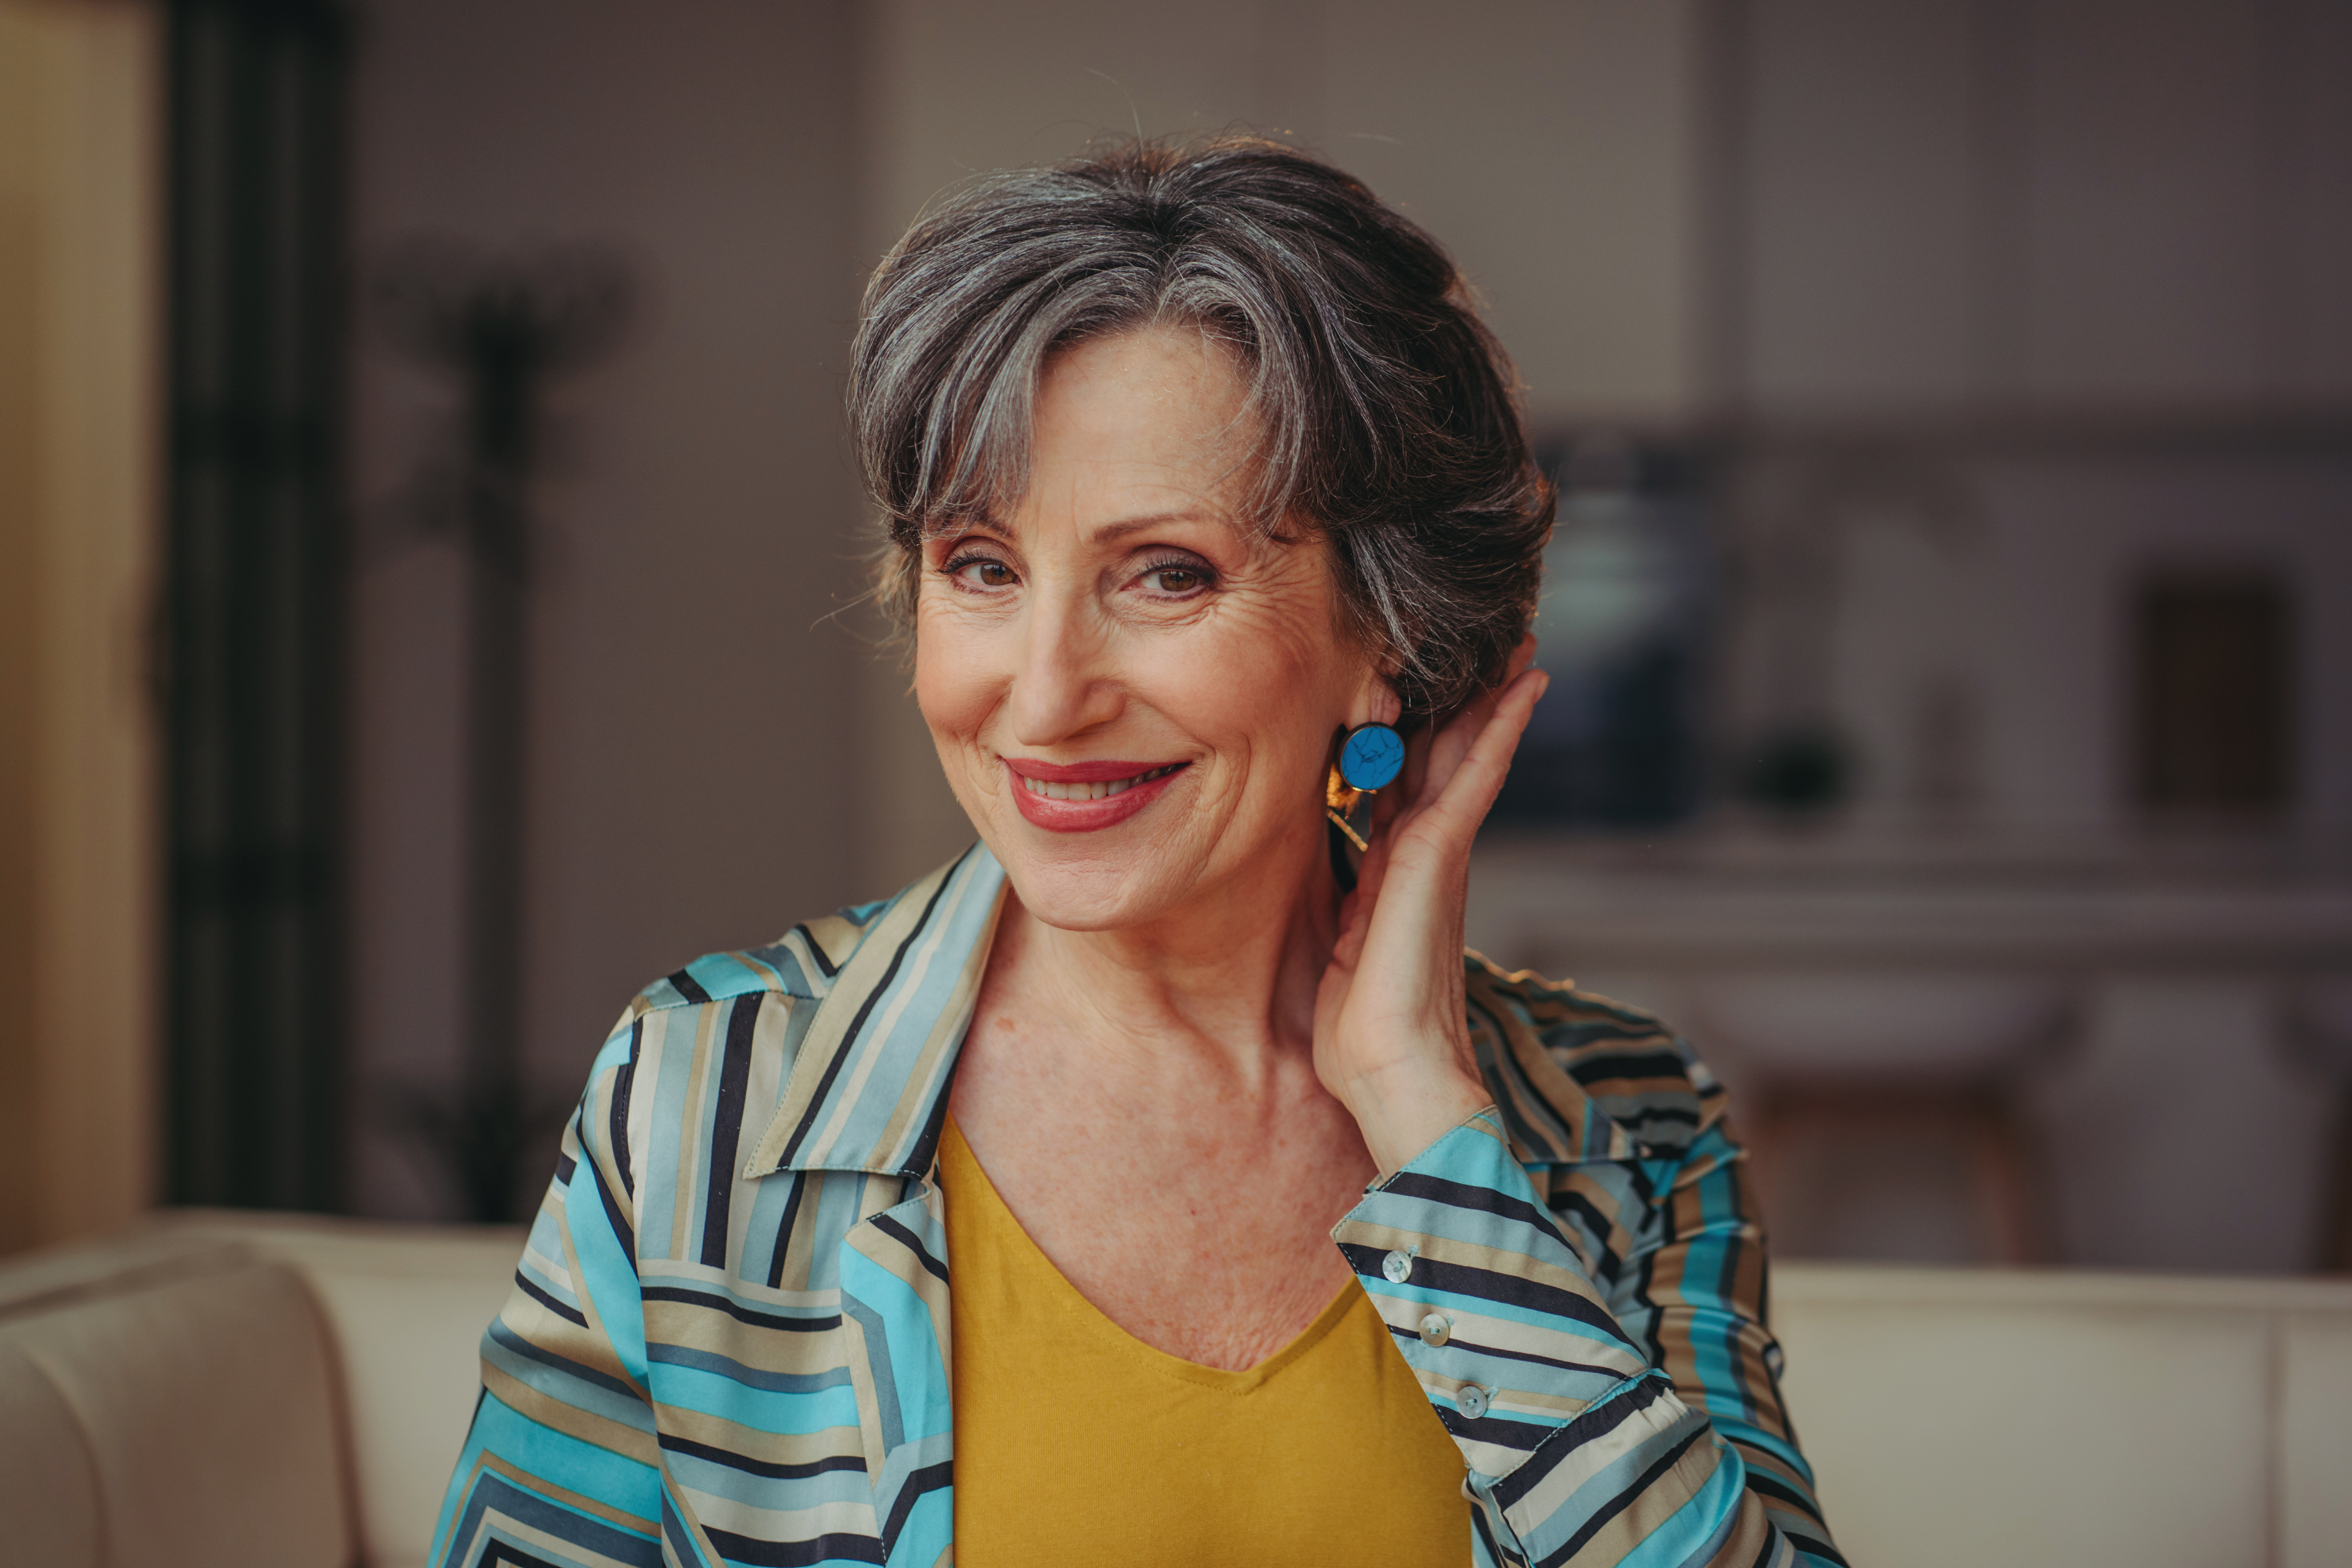 A stylish senior woman flaunting her new haircut | Source: Shutterstock